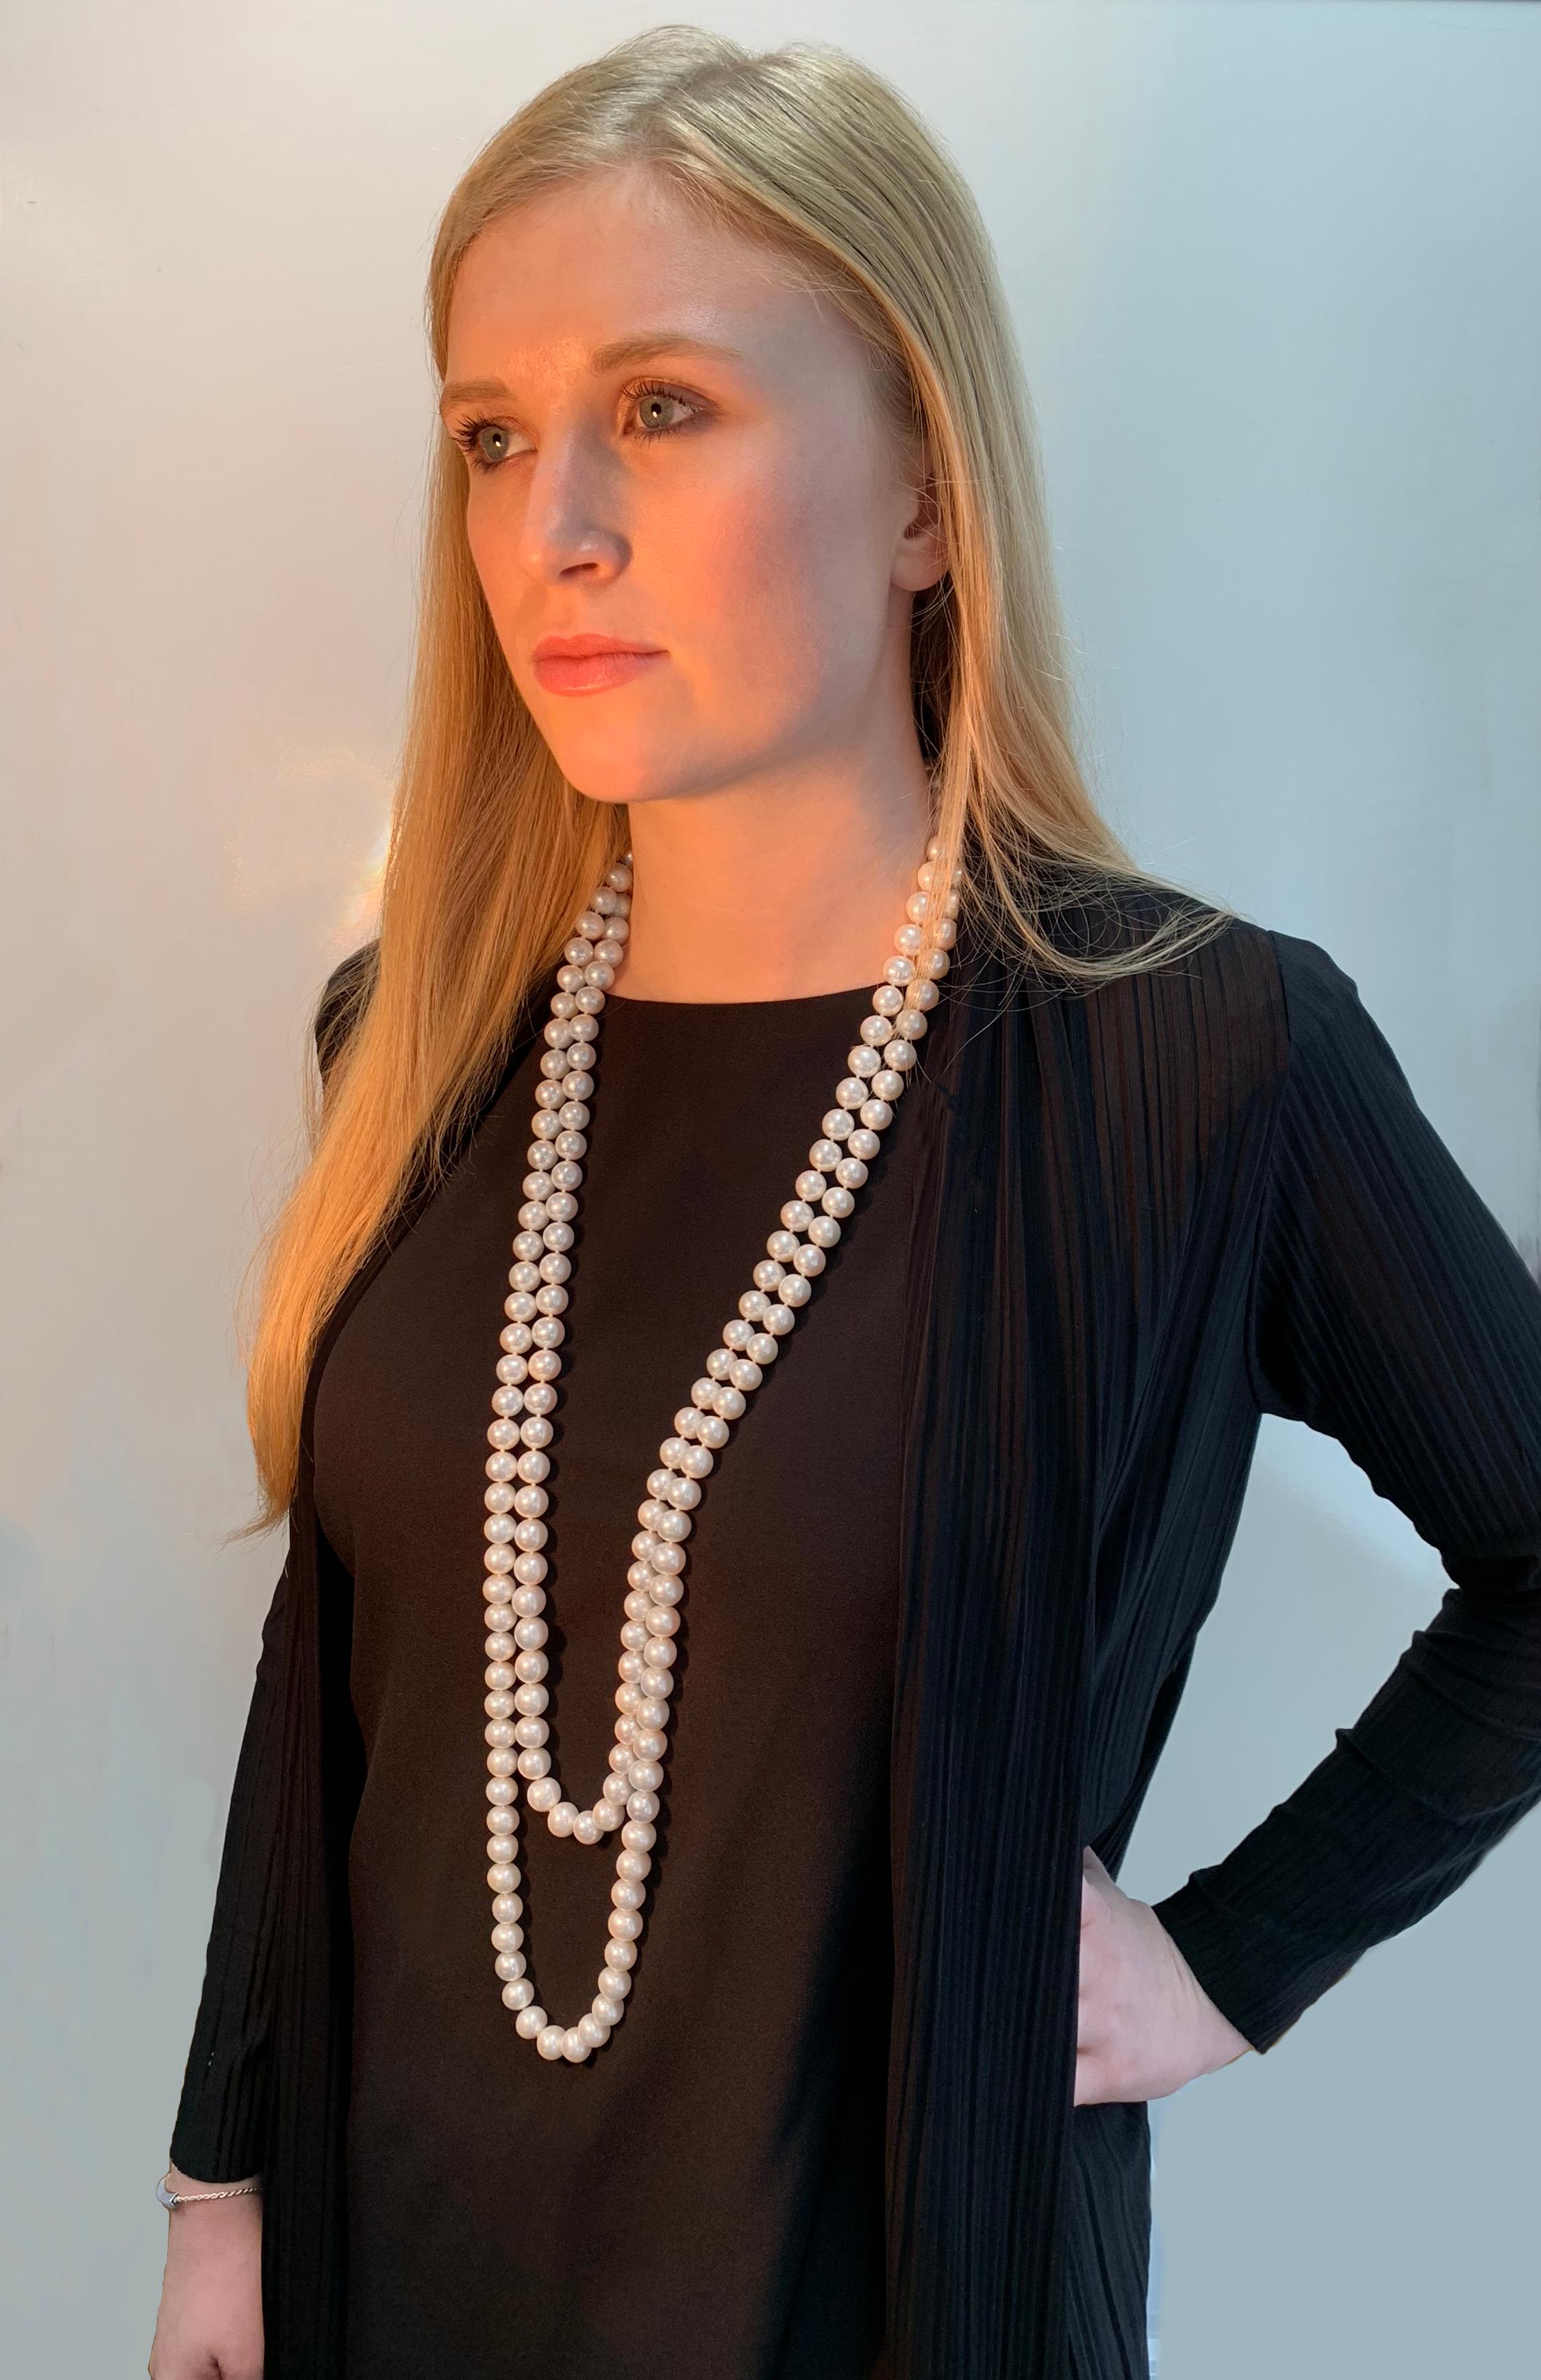 This elegant necklace by Yoko London features two meters of lustrous freshwater pearls, each one selected by experts in our London atelier according to their size, lustre and shape to ensure a seamless and elegant appearance. The beauty of this